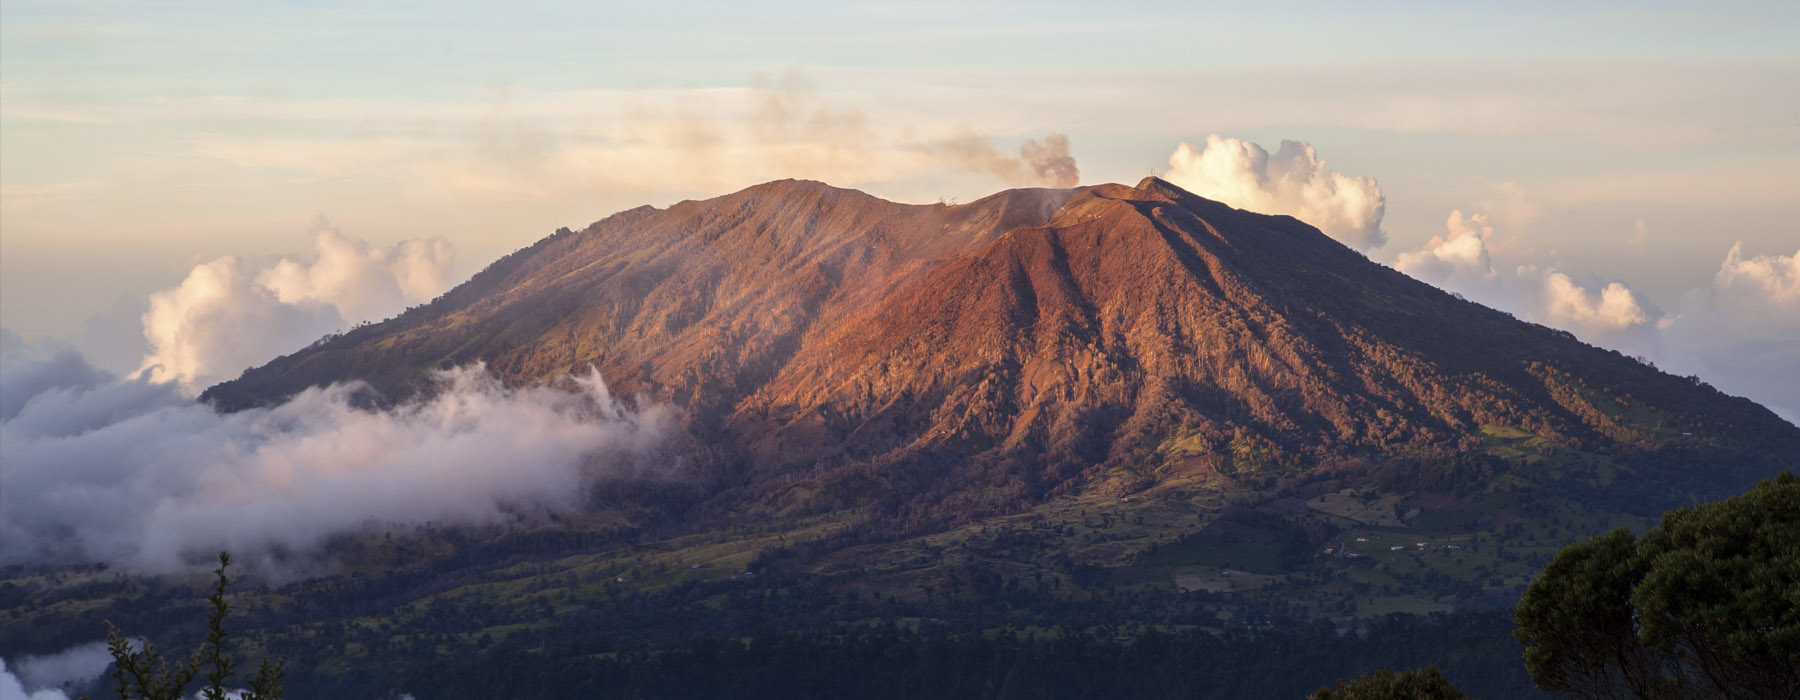 Volcanoes and Cloud Forests<br class="hidden-md hidden-lg" /> Holidays